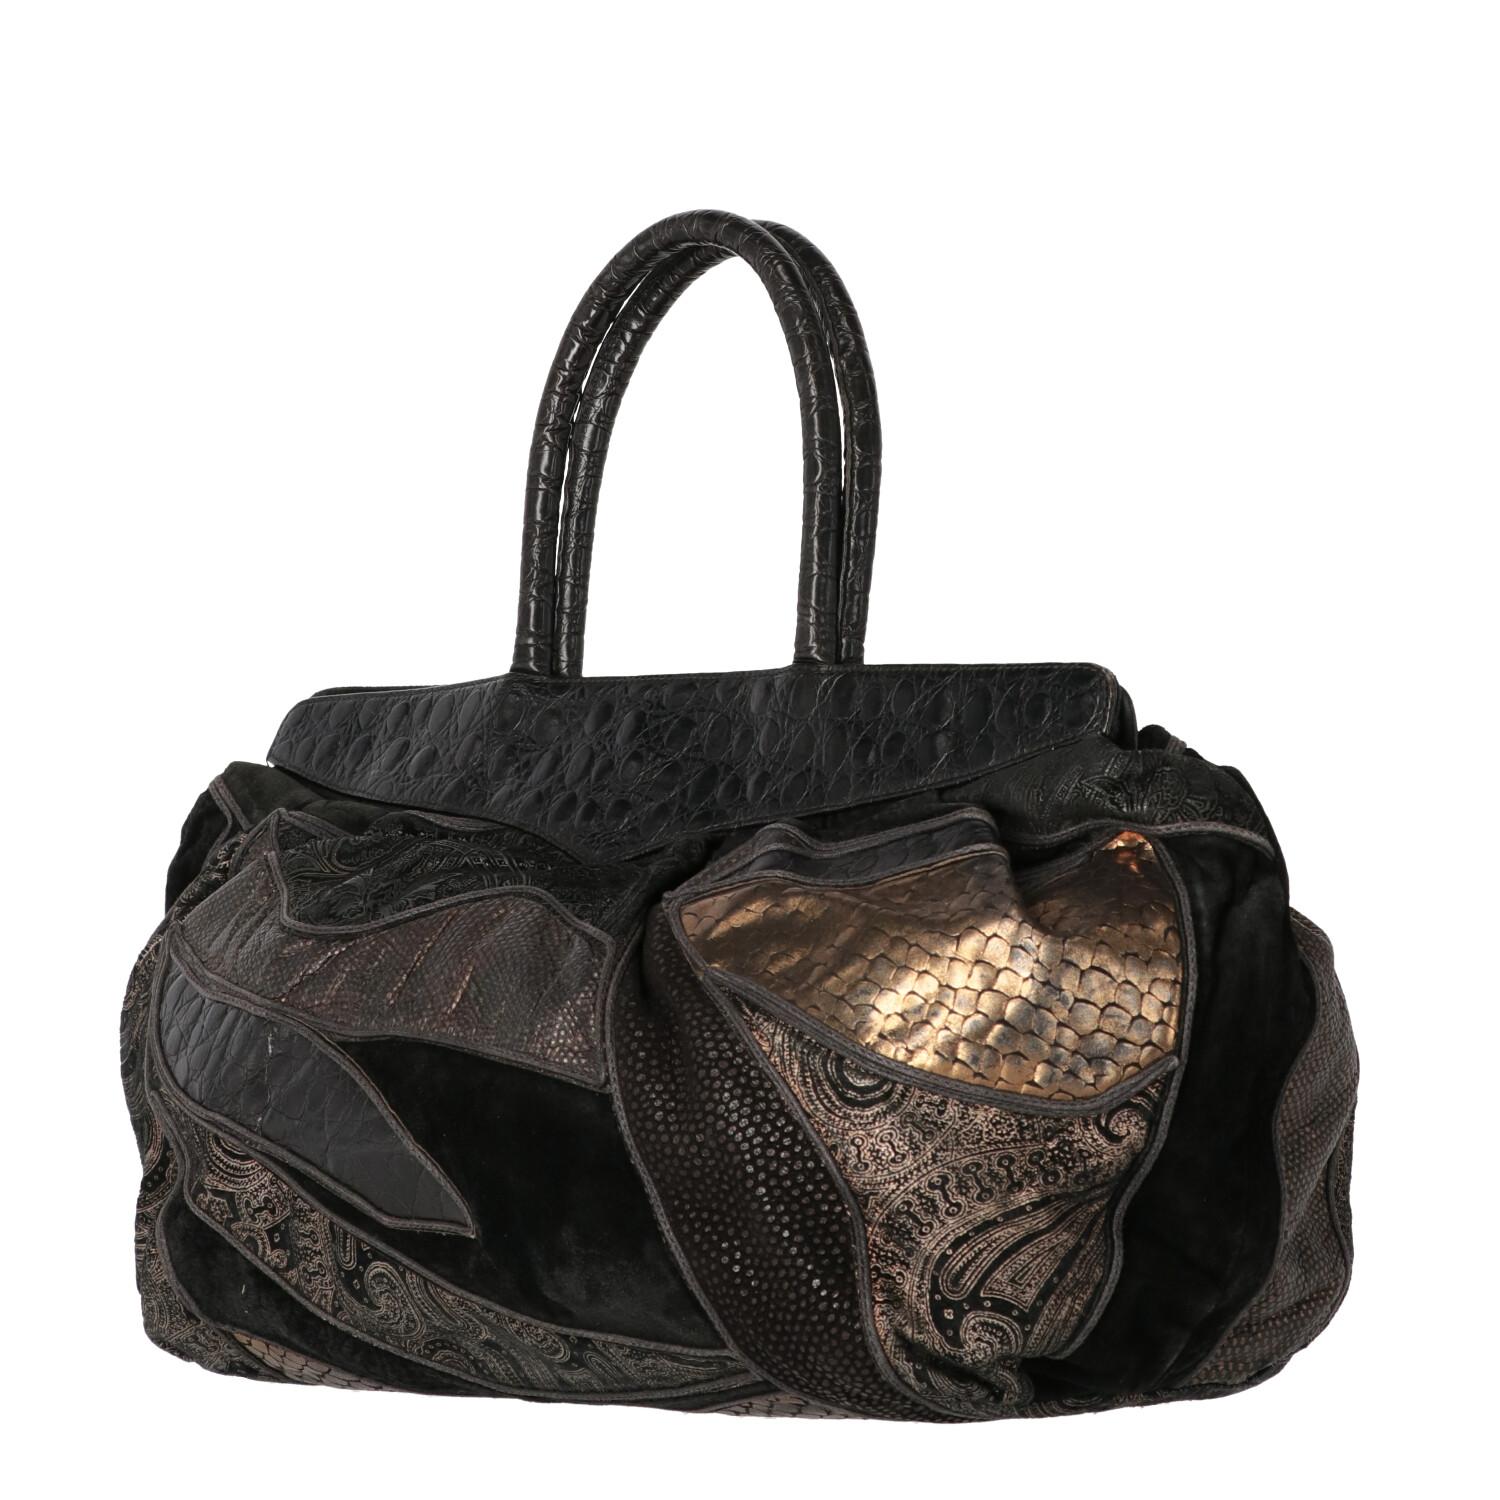 A.N.G.E.L.O. Vintage - ITALY 
Braccialini black leather with patchwork motif bag and different patterns in shades of gold. Model with double leather handles and button closure. Fully lined in leather with internal pockets.
Years: 80s

Made in